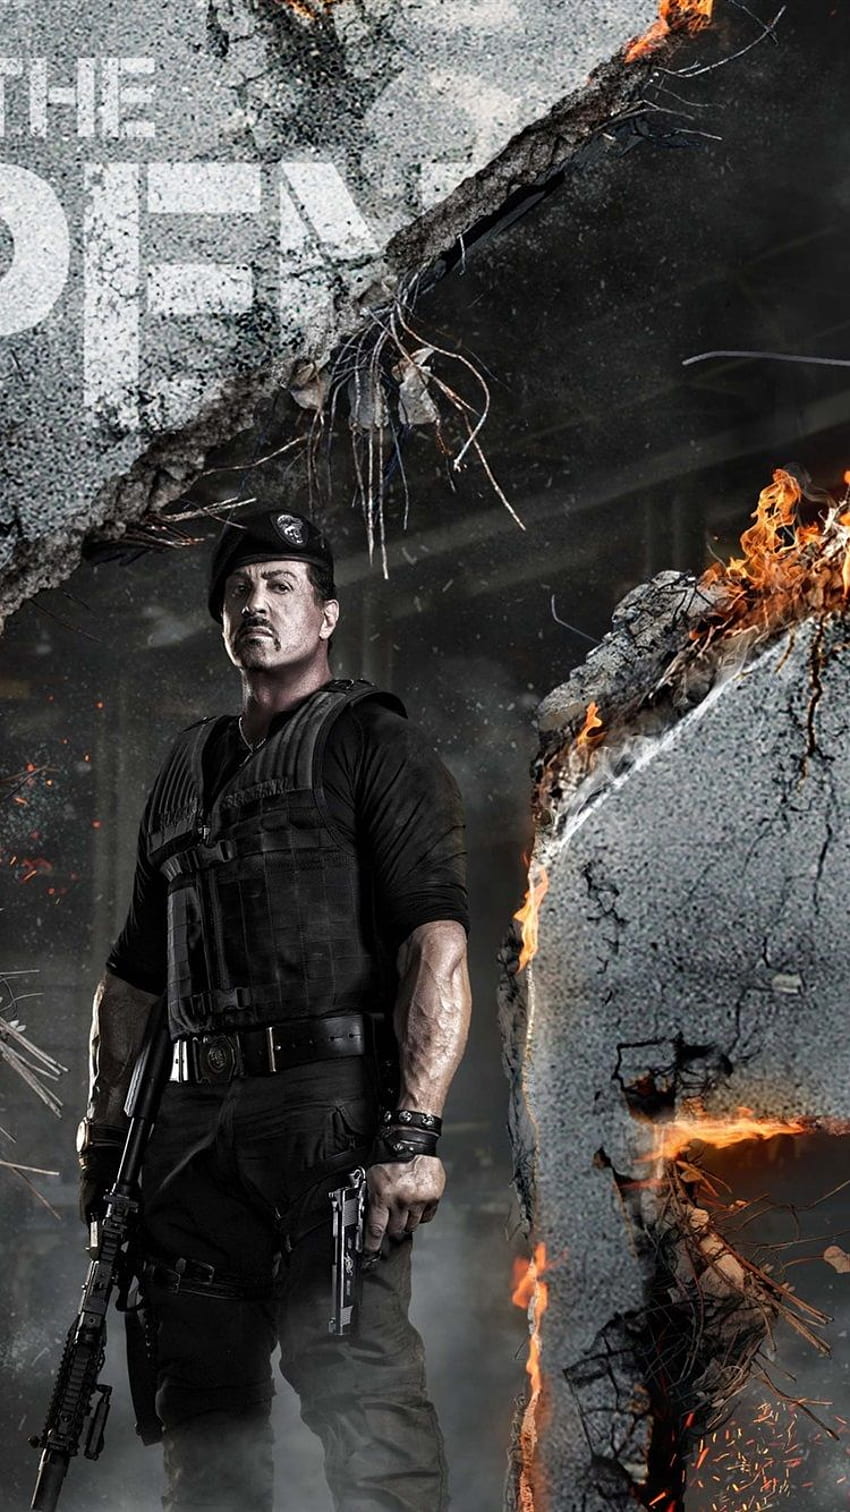 Ini - Sylvester Stallone Expendables, The Expendables wallpaper ponsel HD